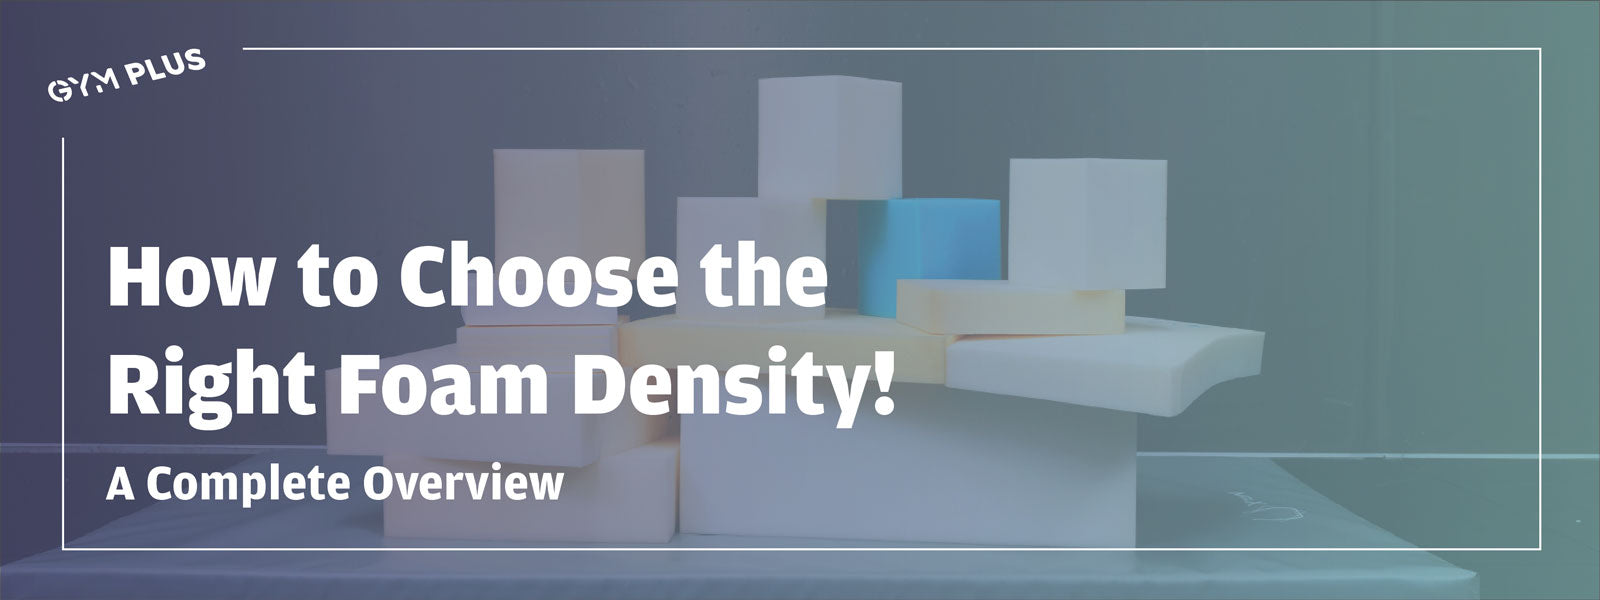 How to choose the Right Foam Density? A Complete Overview